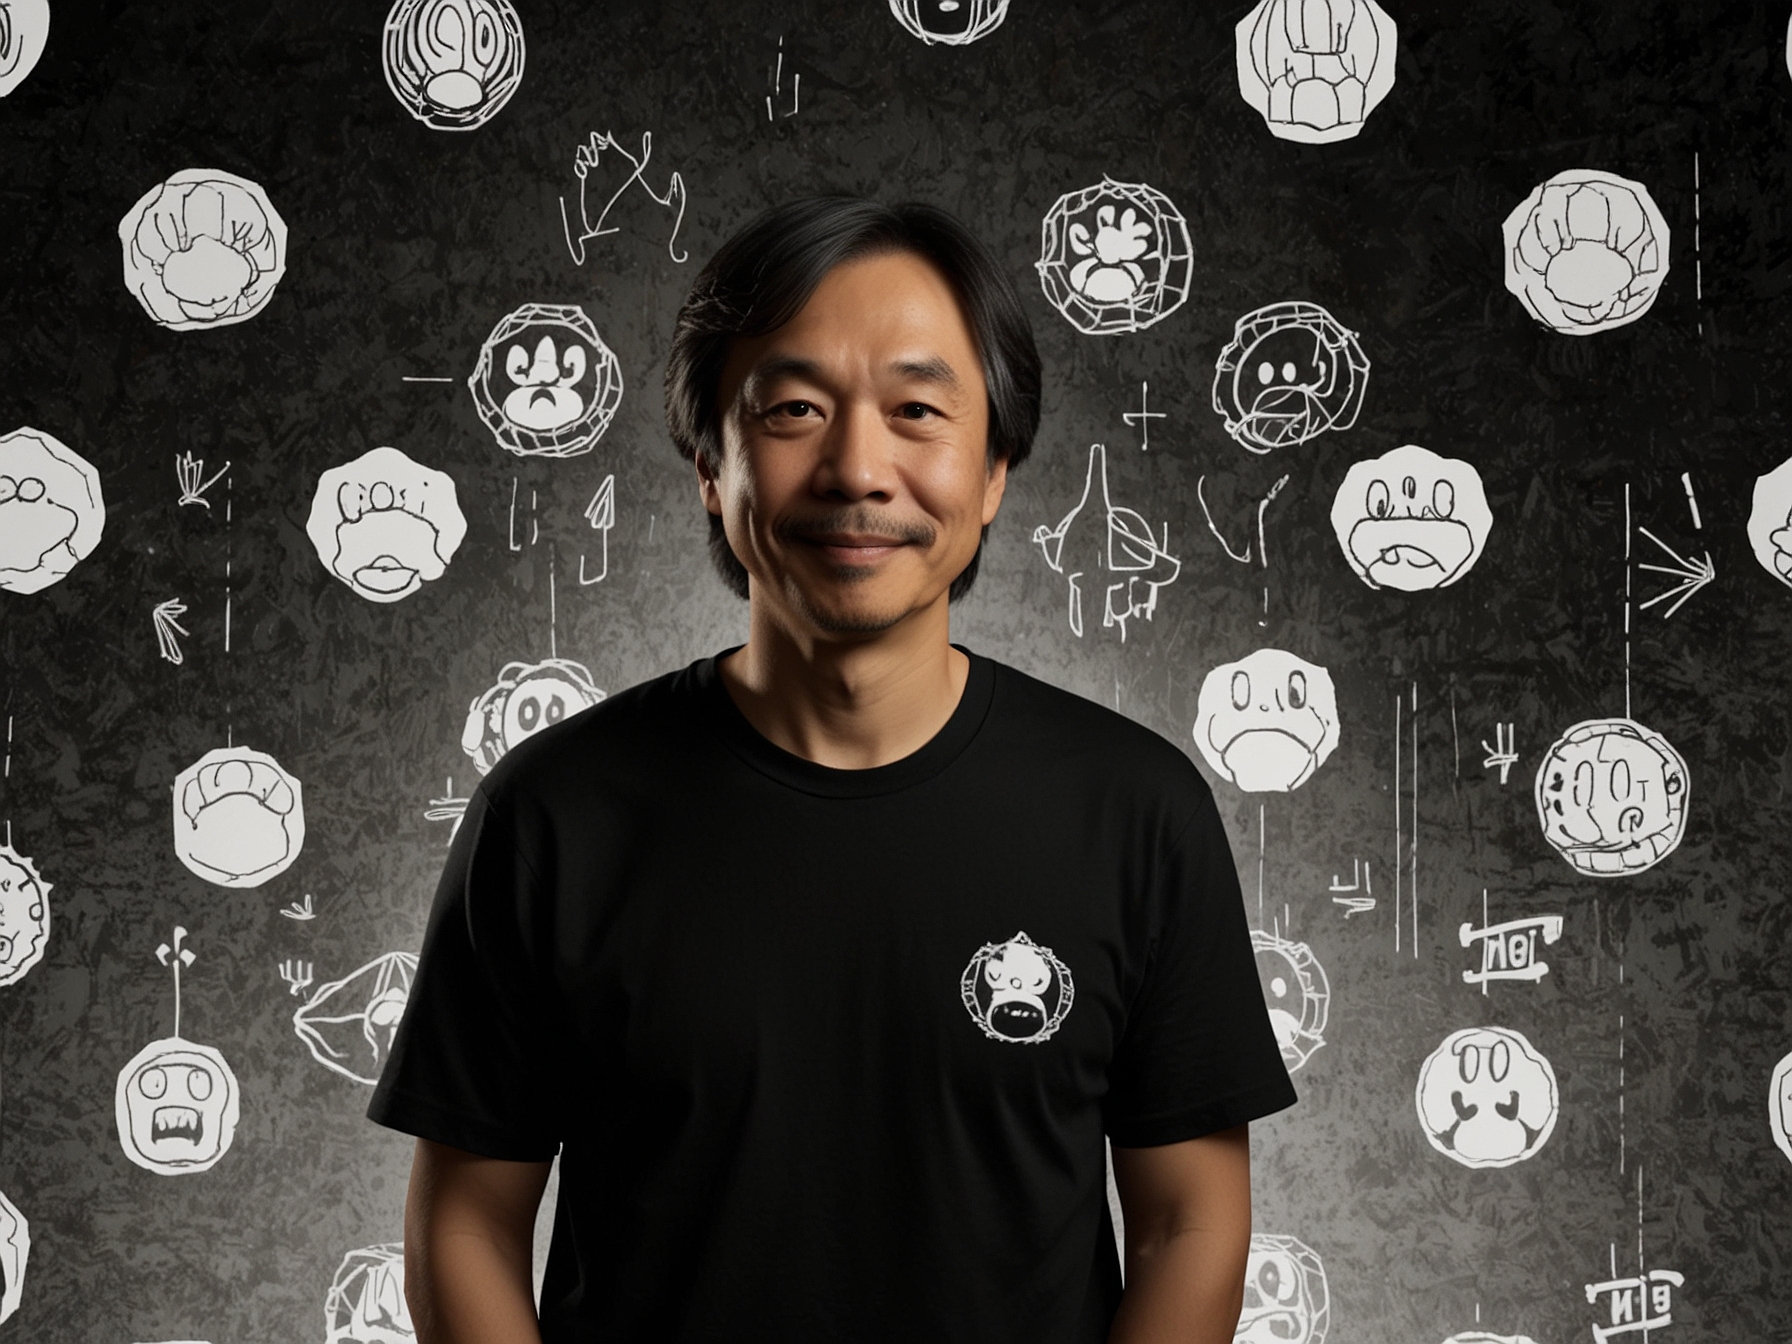 Shigeru Miyamoto and Illumination's logo side by side, symbolizing their collaboration. The background features iconic elements from the Mario games, emphasizing the movie's roots in the beloved franchise.